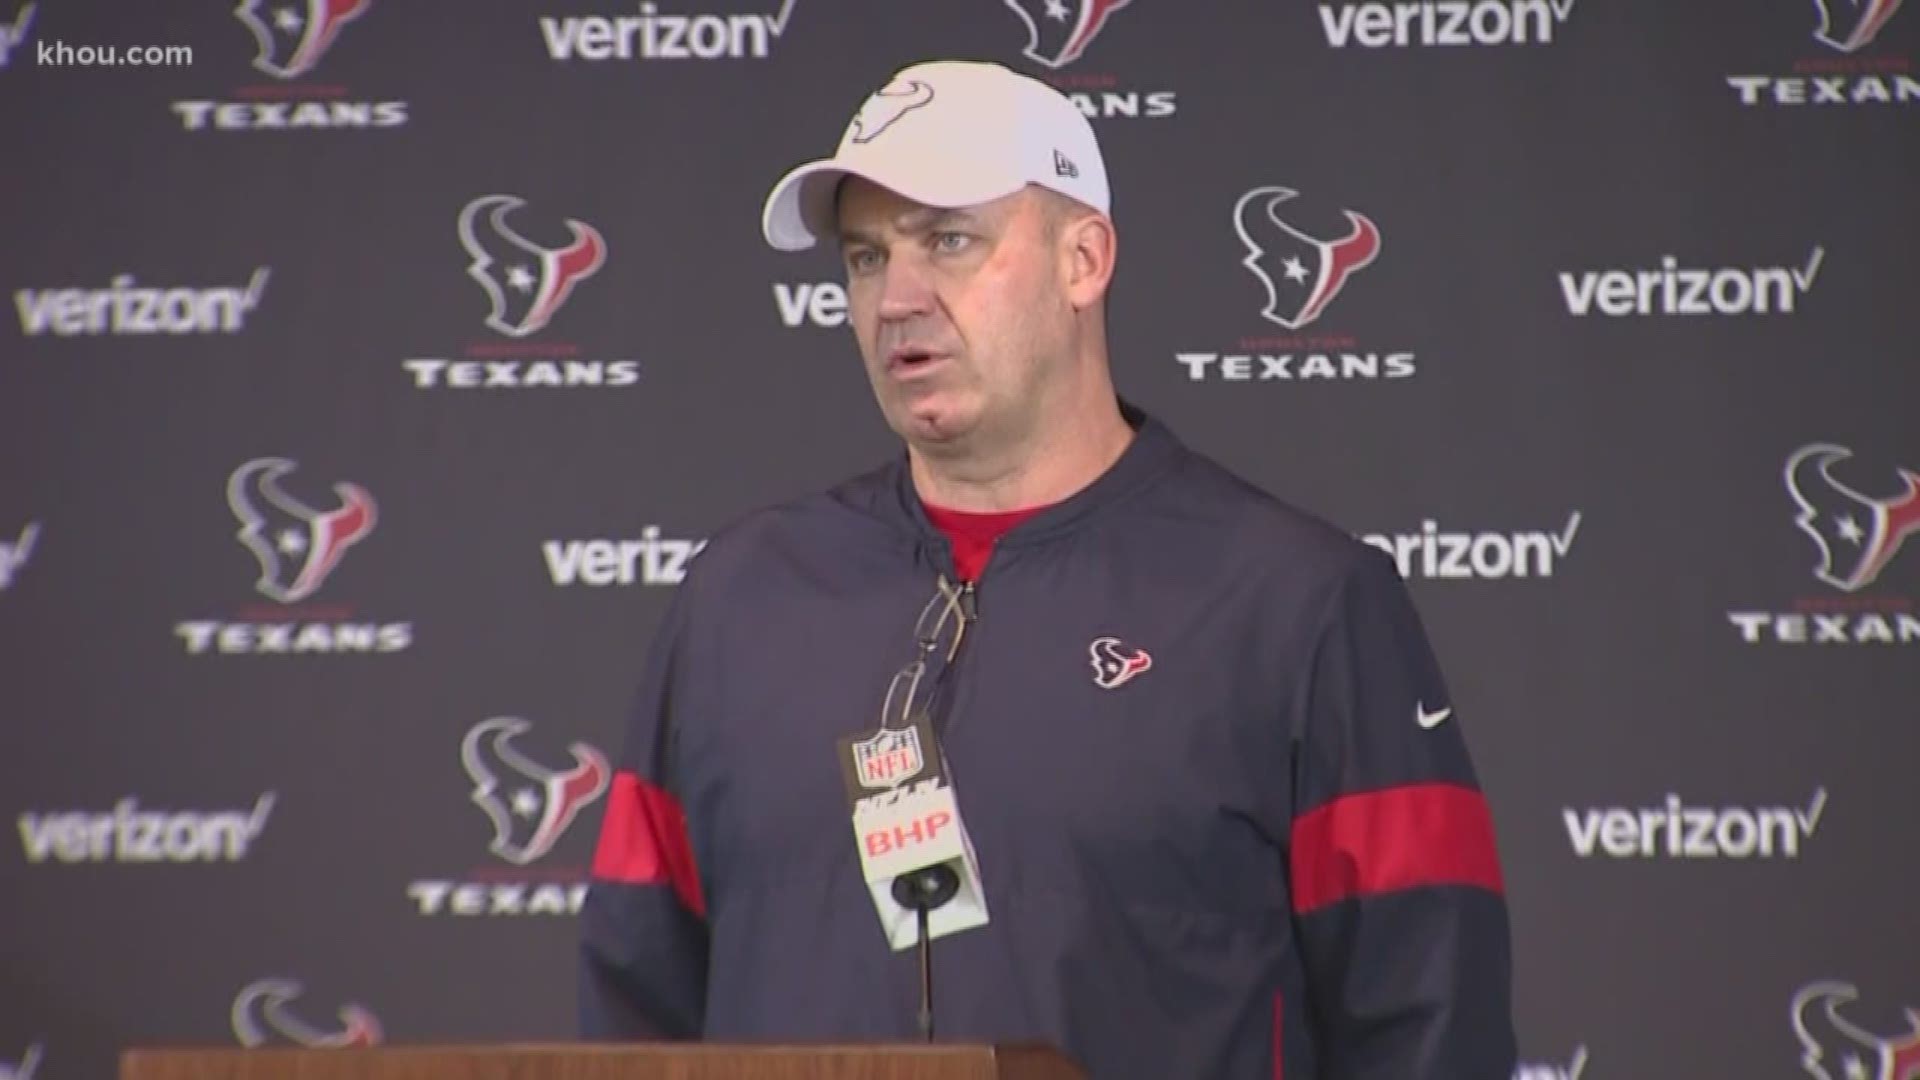 Houston Texans head coach Bill O'Brien said he is proud of the team after beating the Patriots 28-22 Sunday night.